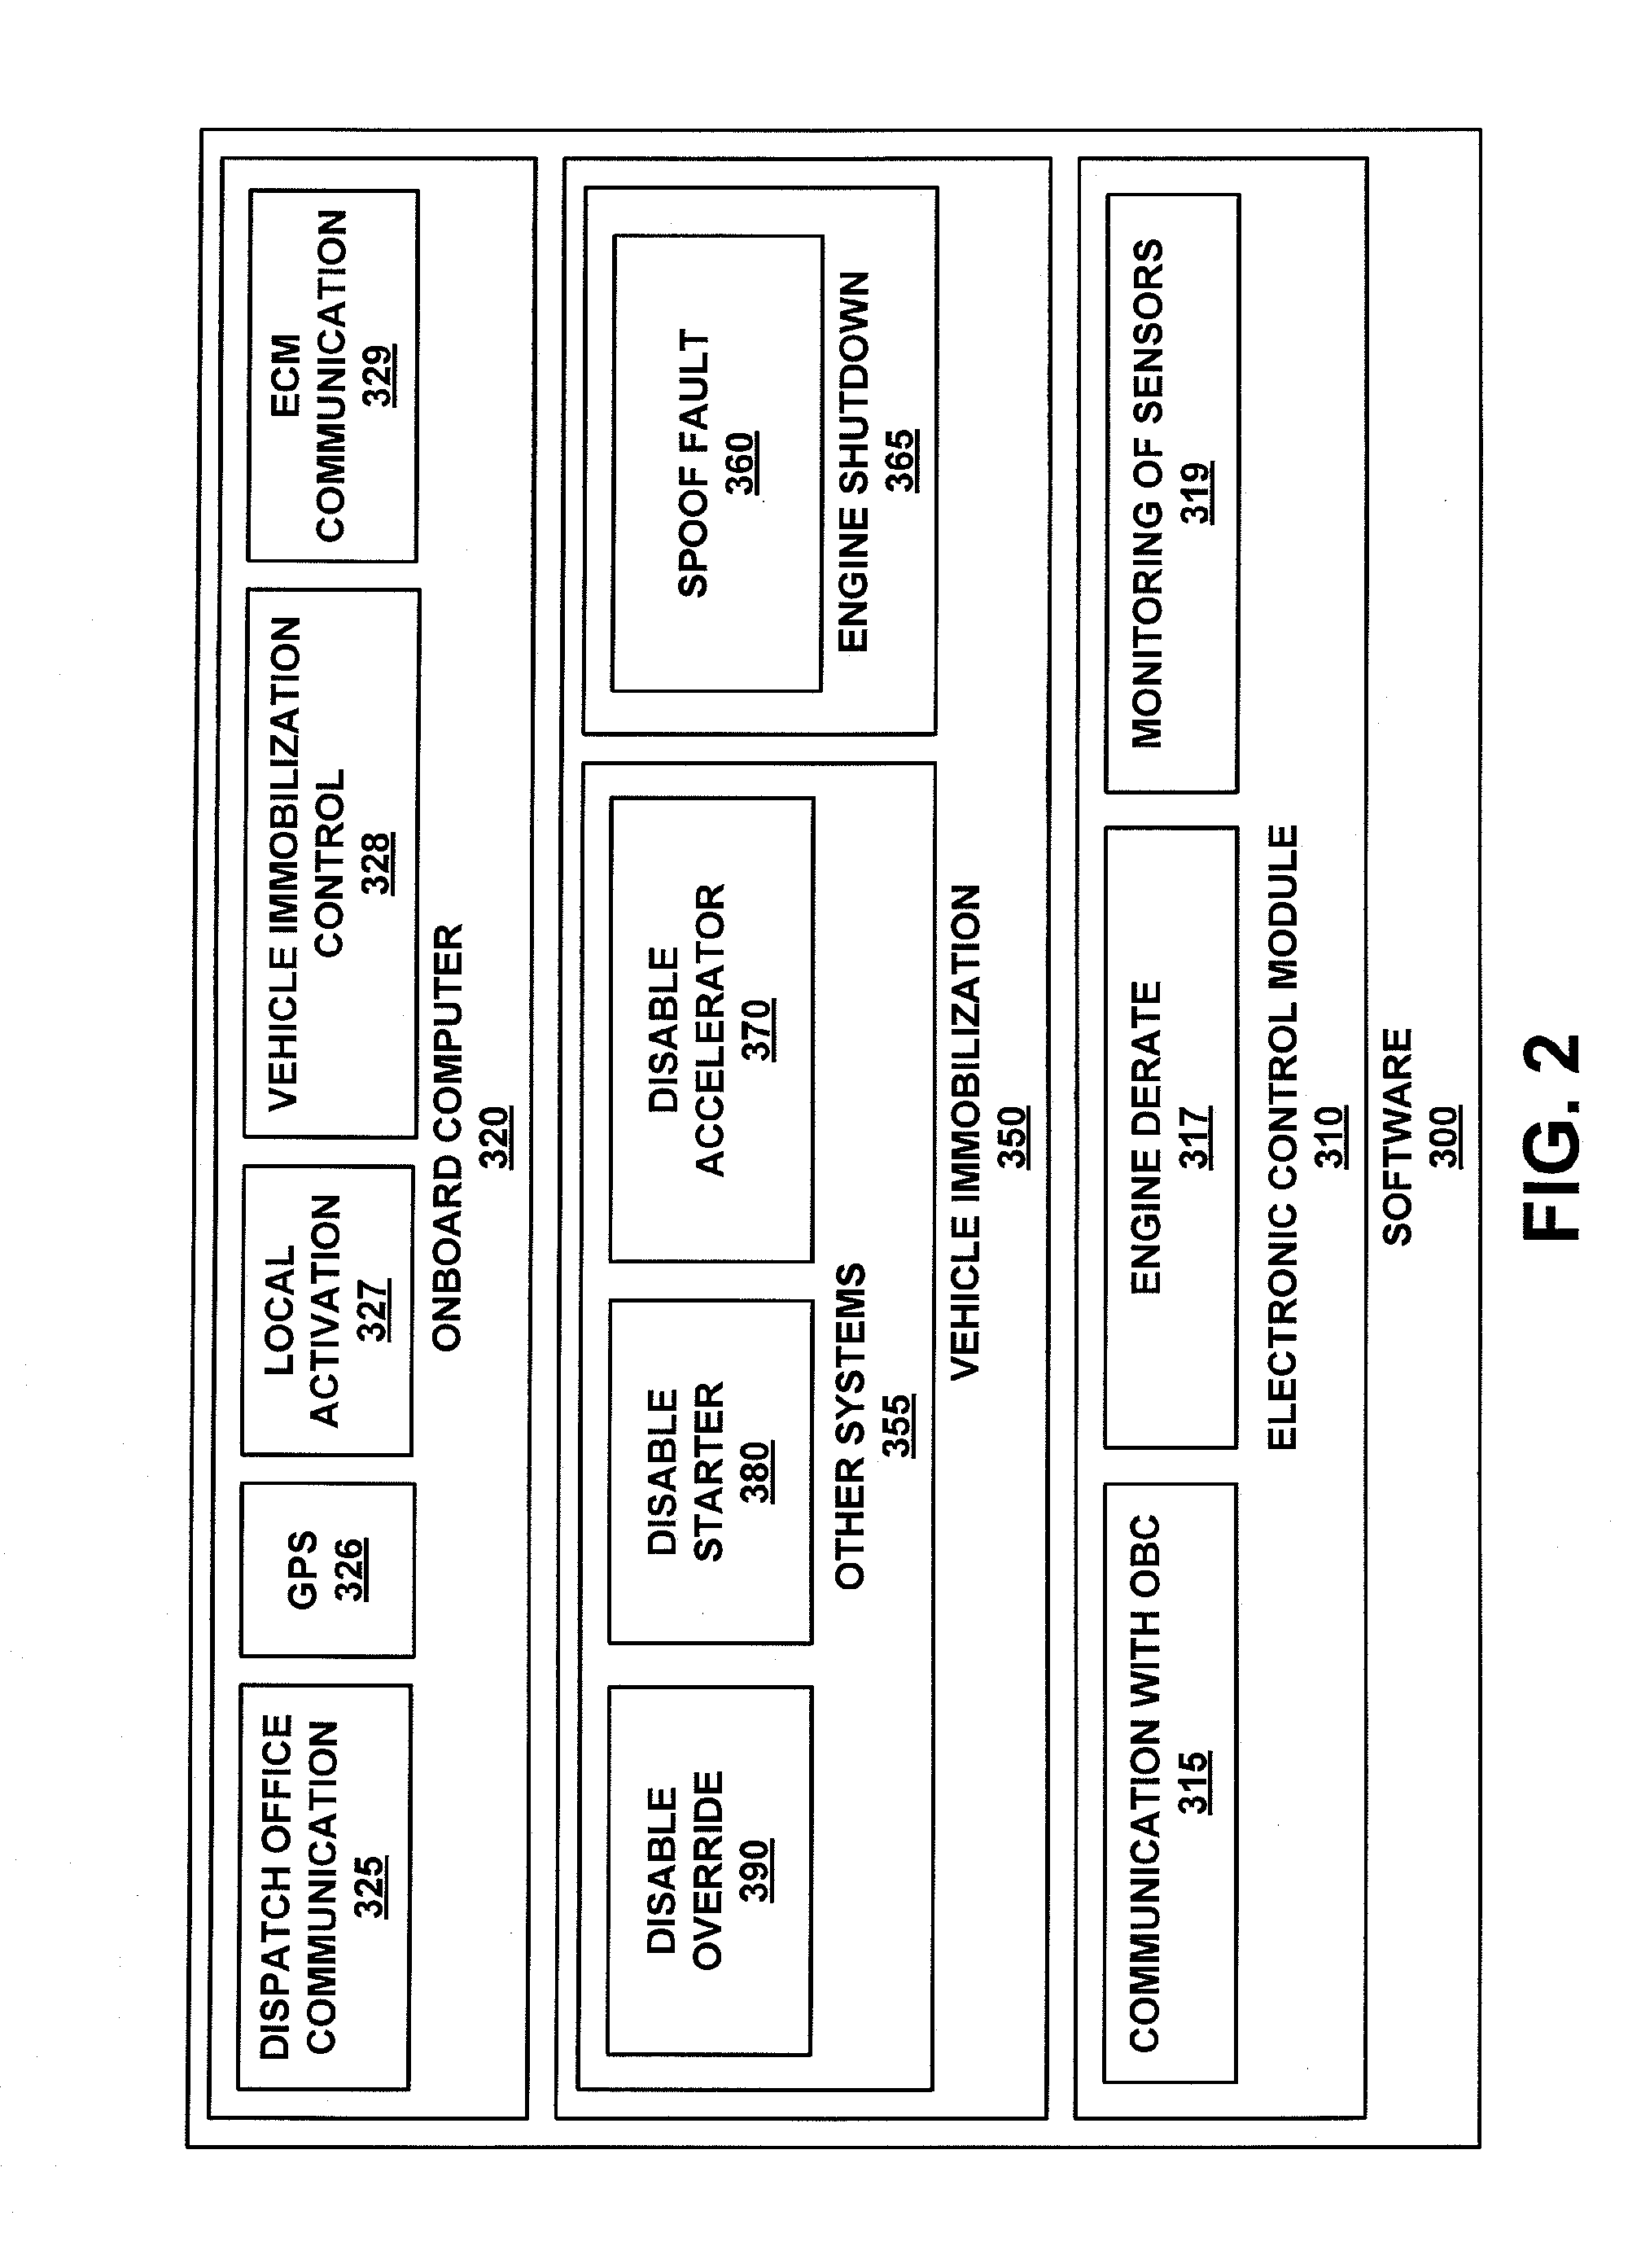 System and method for immobilizing a vehicle